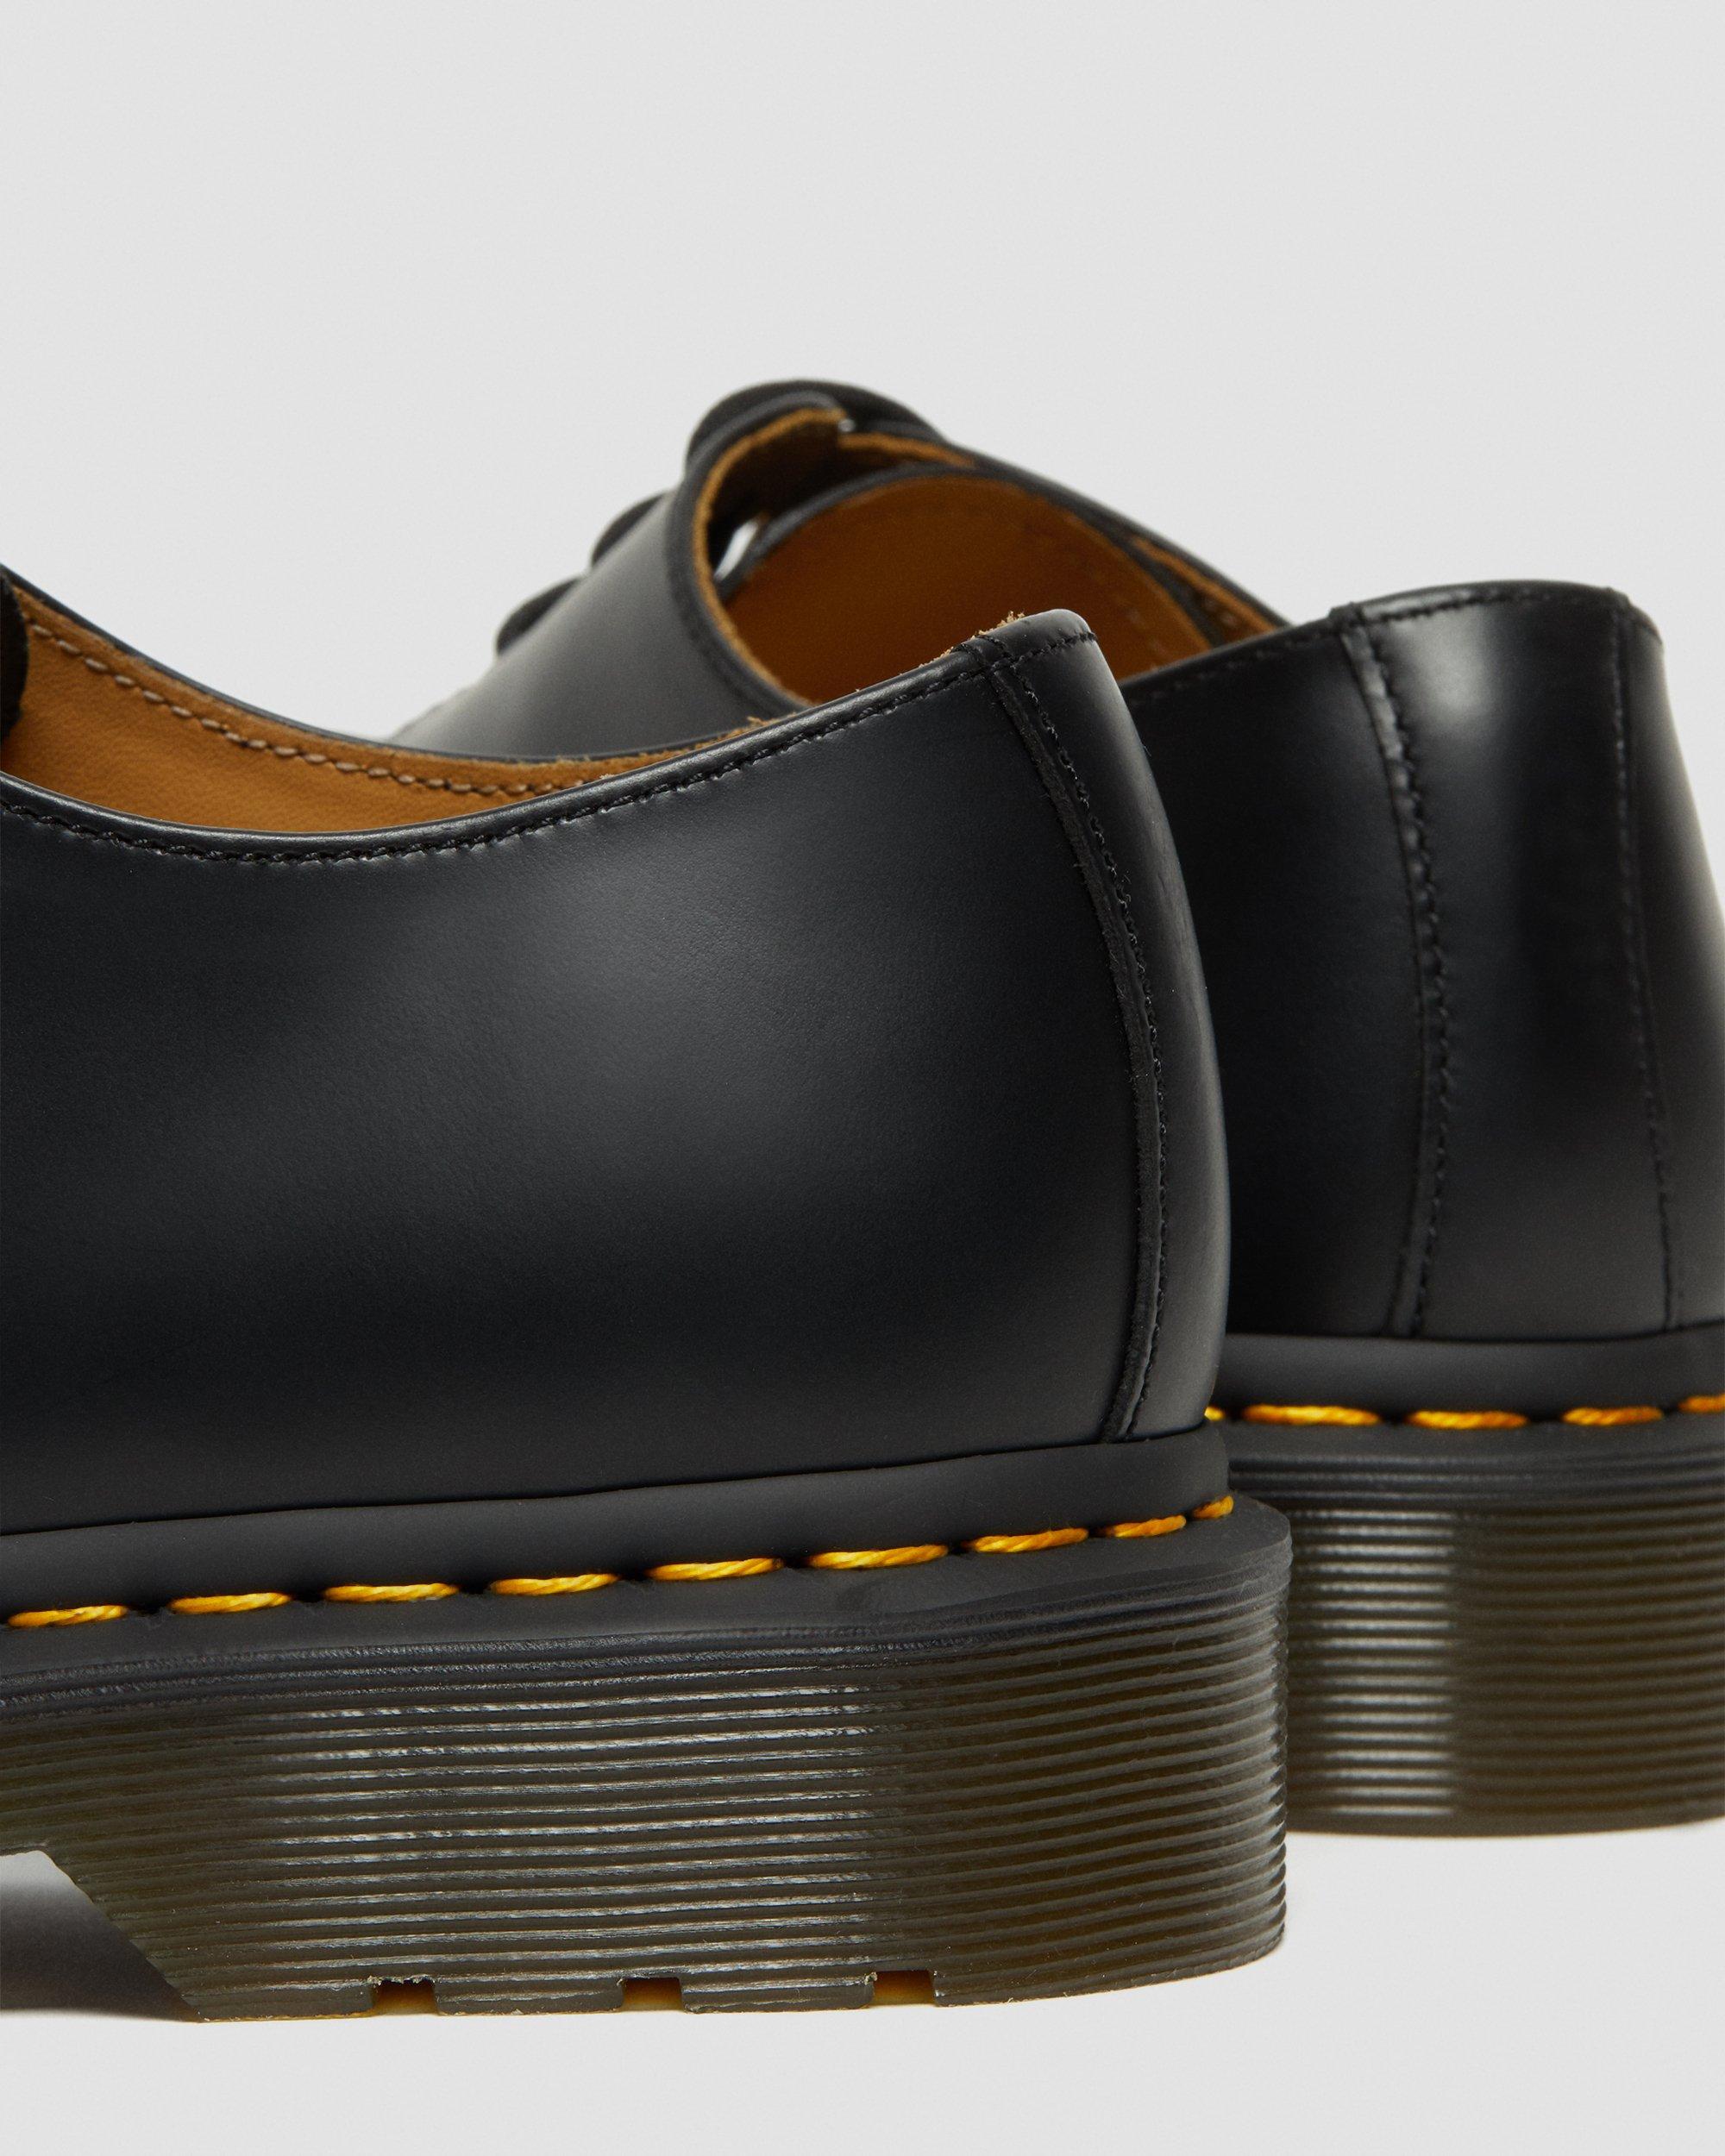 https://i1.adis.ws/i/drmartens/10111001.88.jpg?$large$1925 Leather Oxford Shoes Dr. Martens